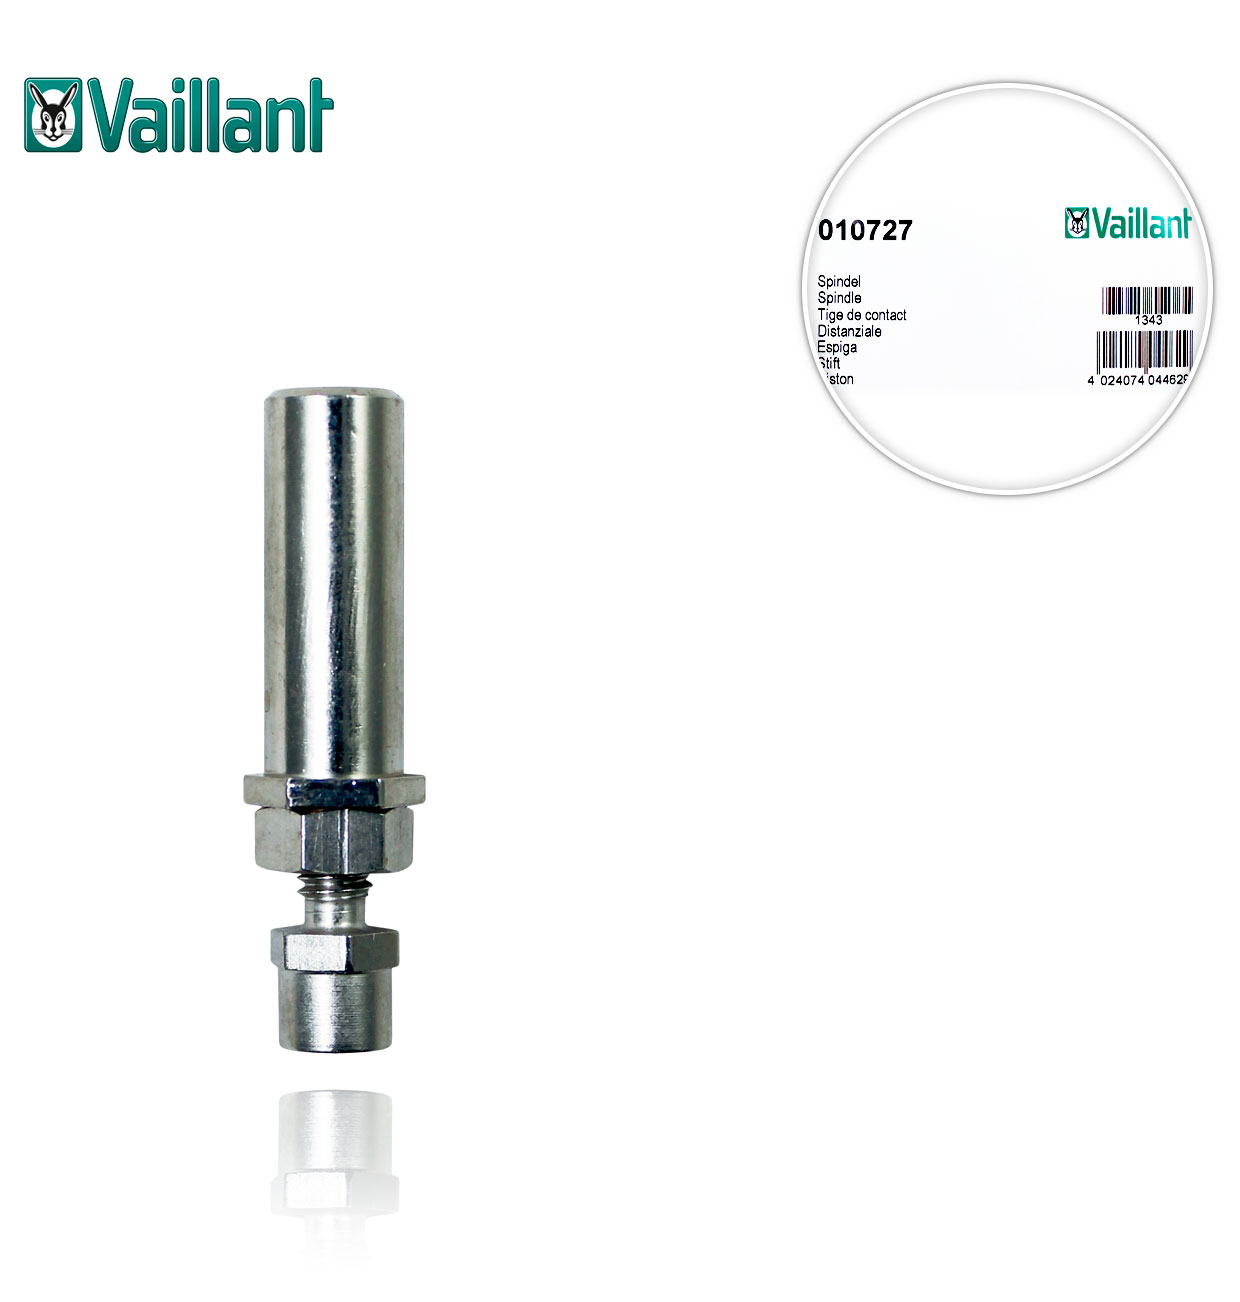 VAILLANT 010727 WATER VALVE SPINDLE